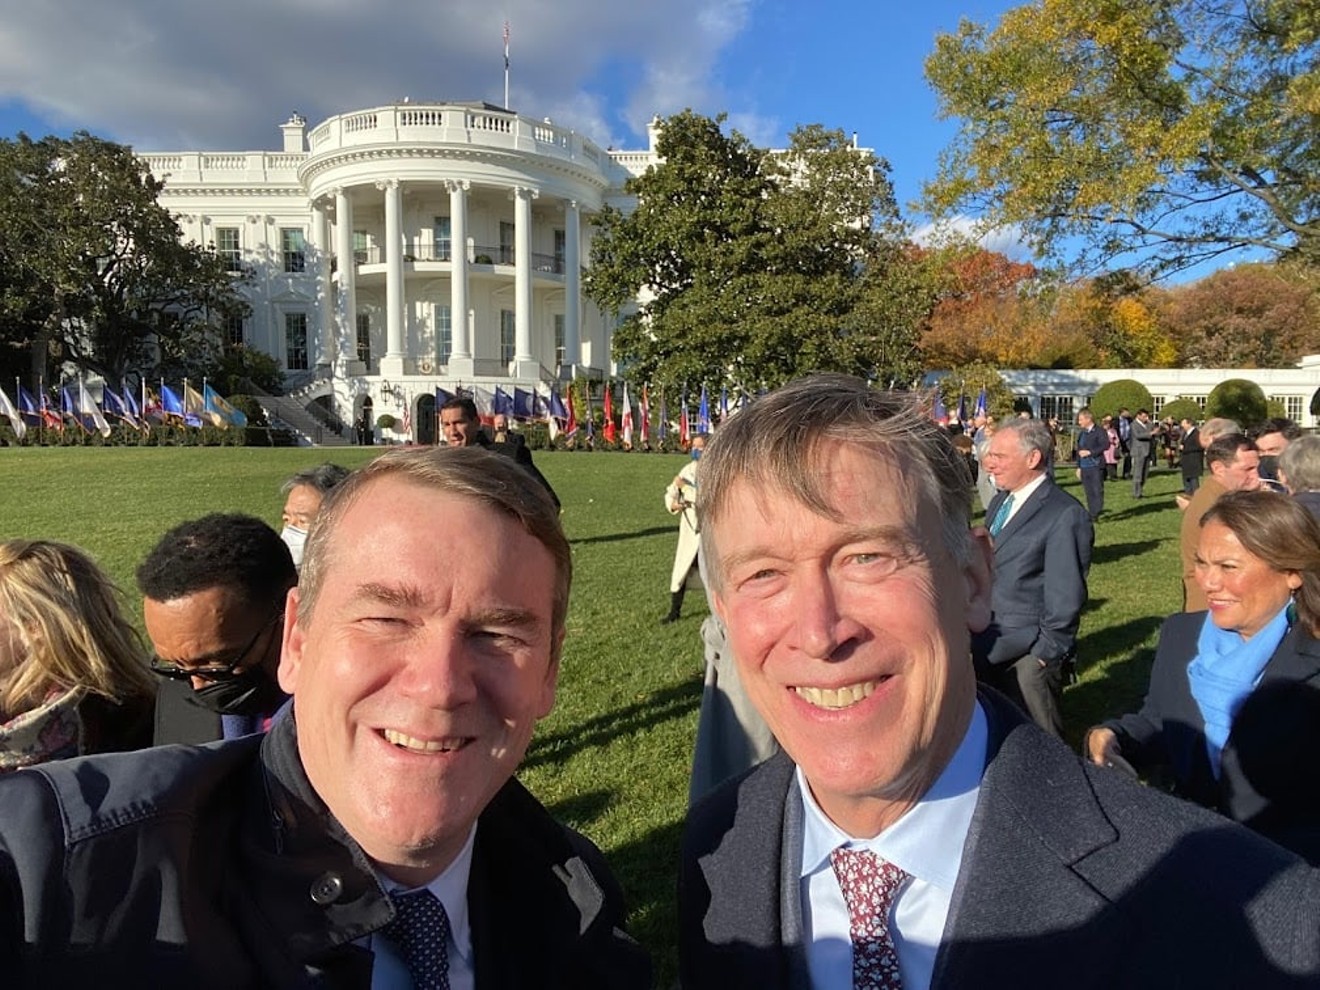 Colorado senators Michael Bennet (left) and John Hickenlooper sent a joint letter to Congressional leaders in hopes of swaying them in favor of marijuana banking.